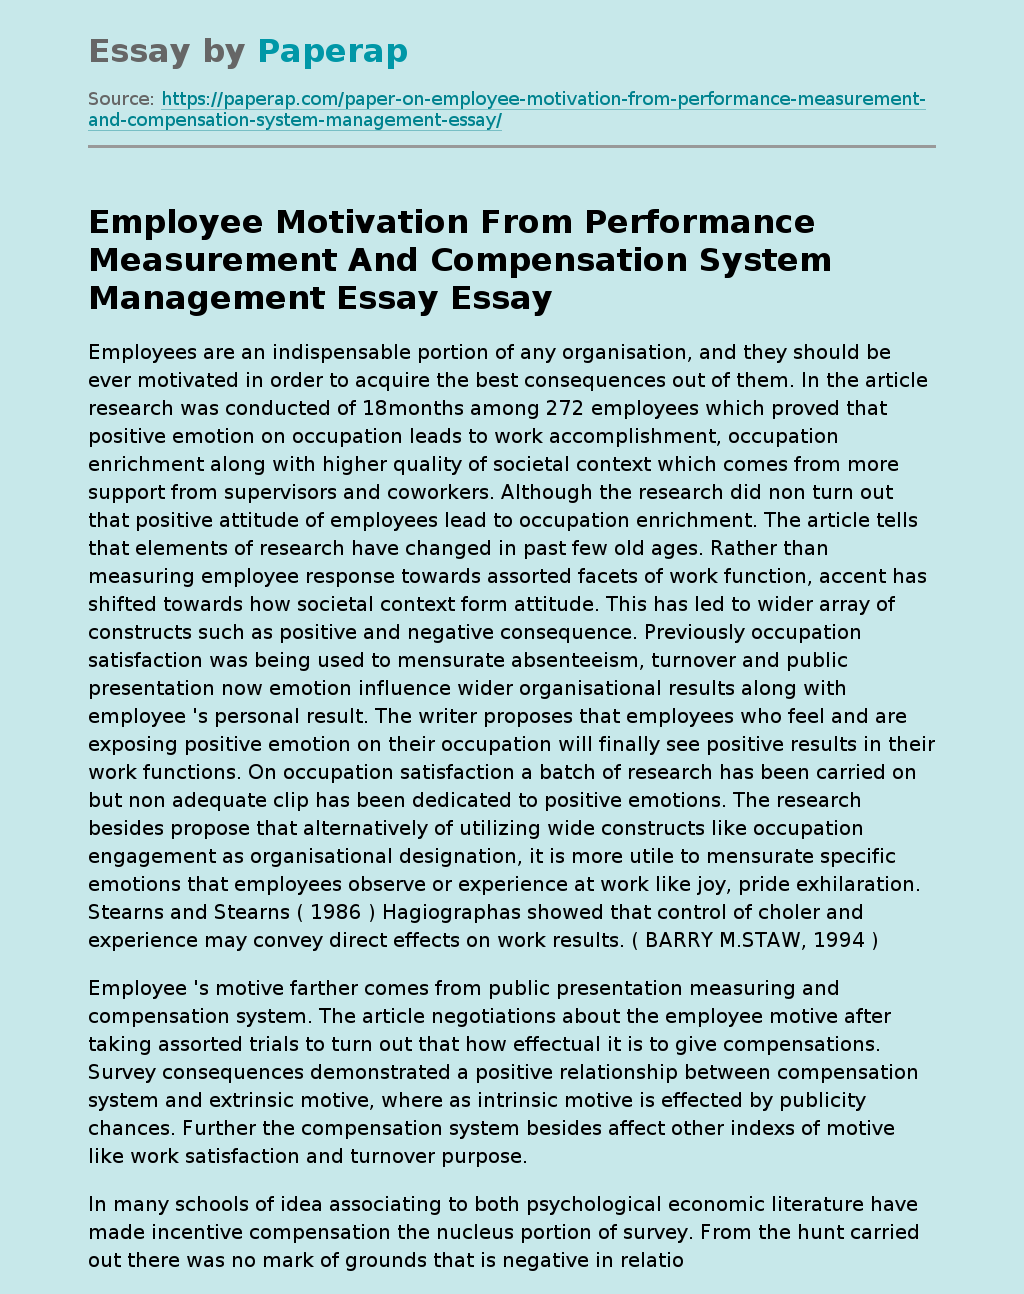 Employee Motivation From Performance Measurement and Compensation System Management